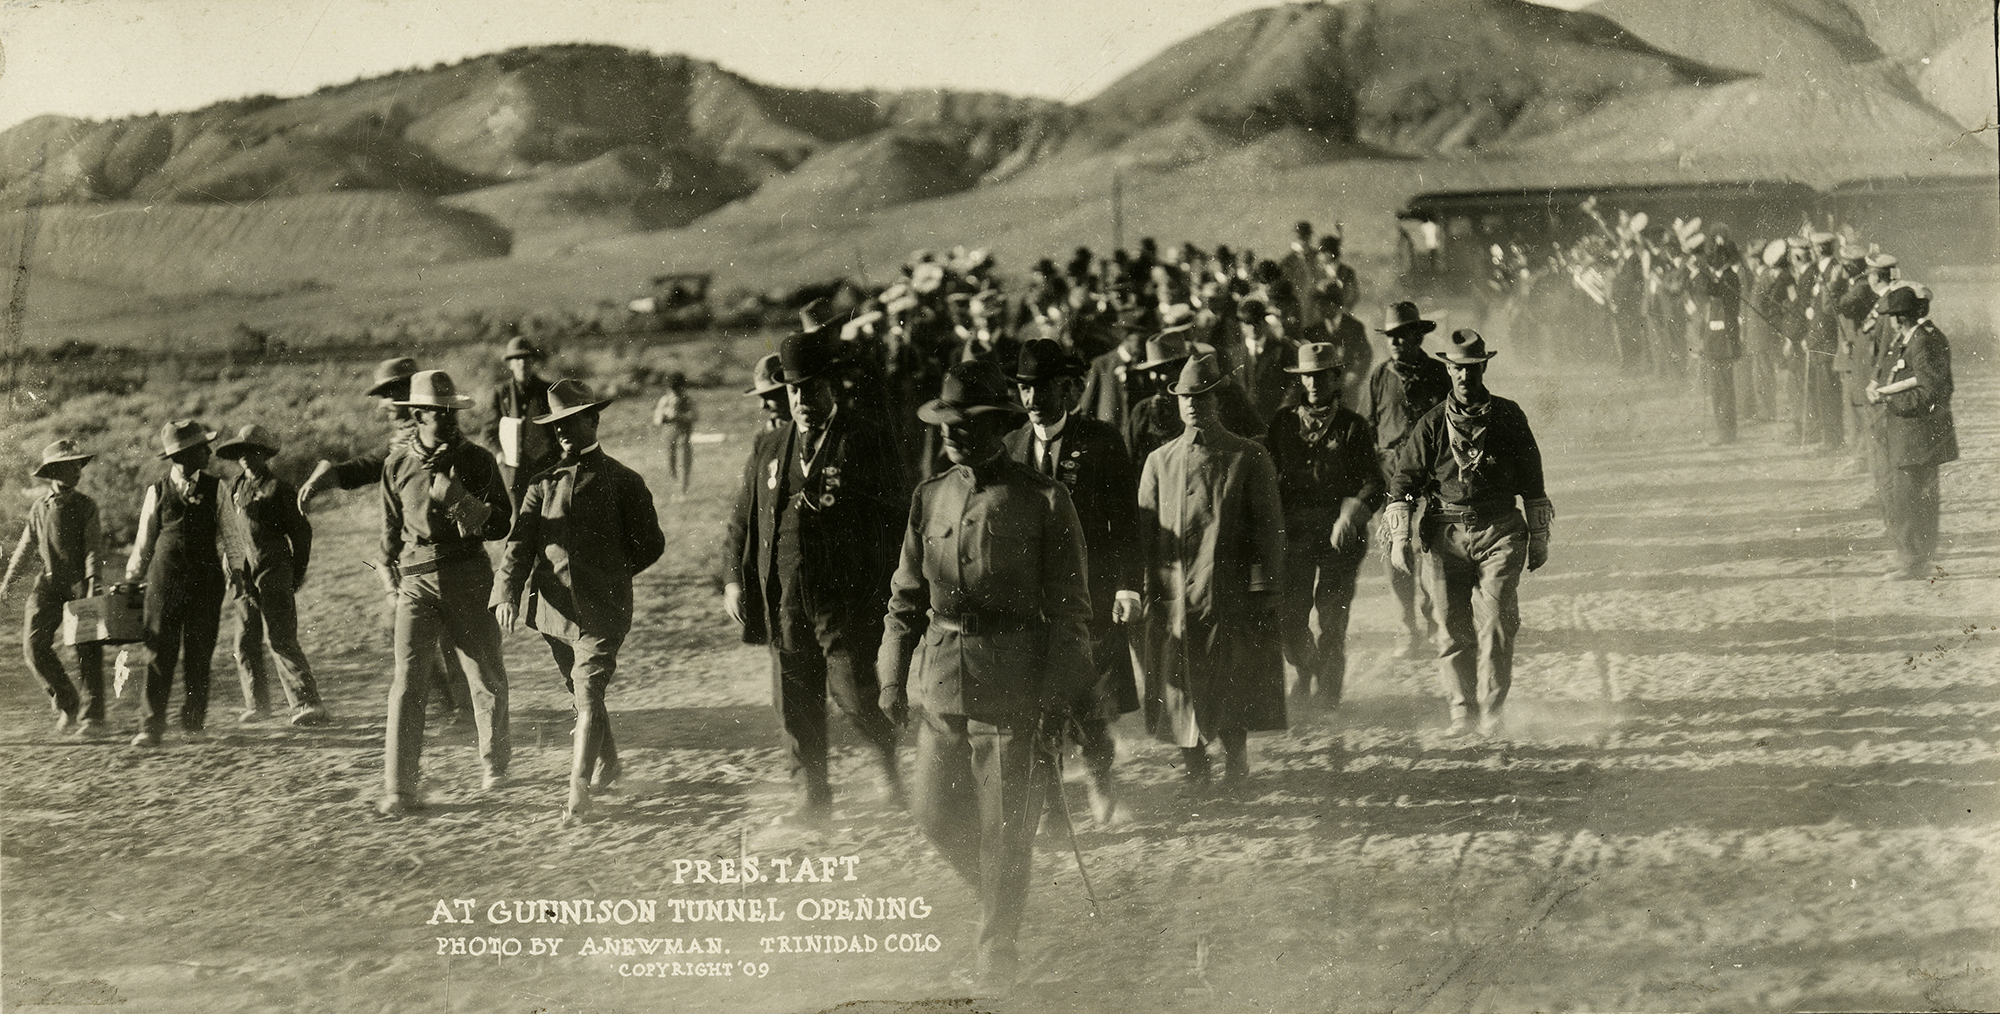 A group of men walk across a dusty landscape wearing coats and hats. President William Howard Taft is one of their number. Mountains are visible behind them.